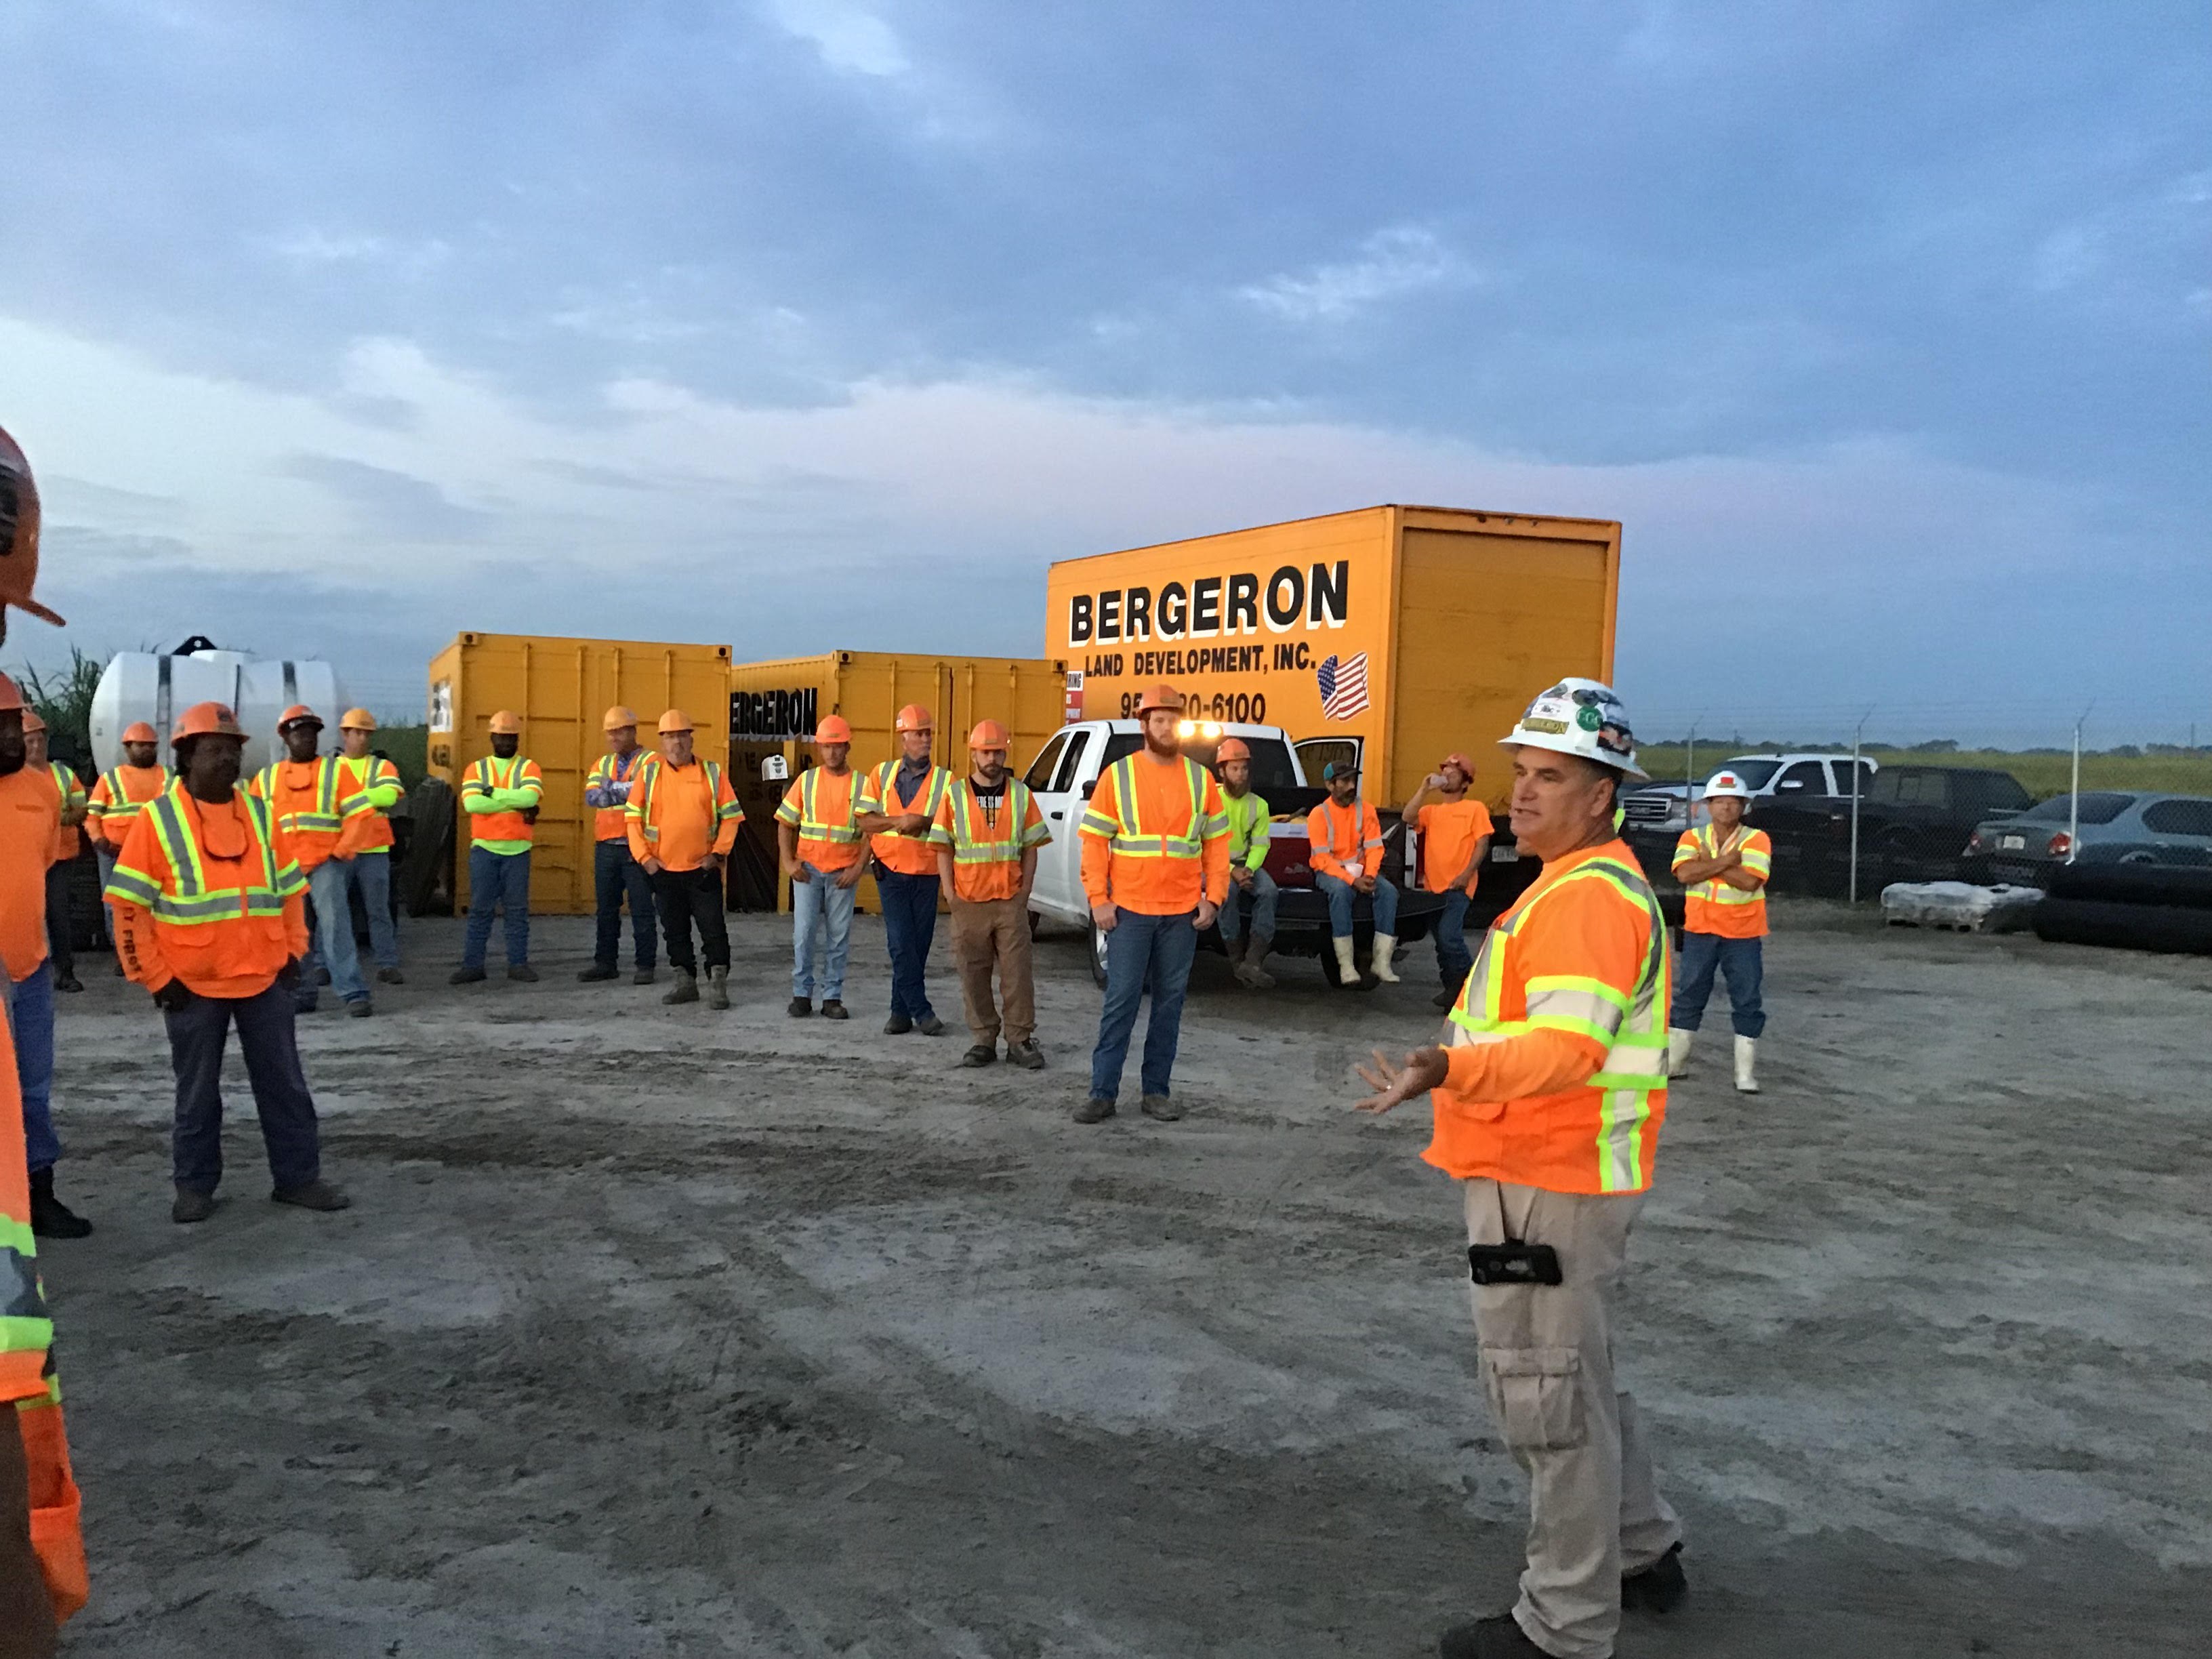 Bergeron Land Development employees start the day with a safety meeting at a roadway construction or site development project.